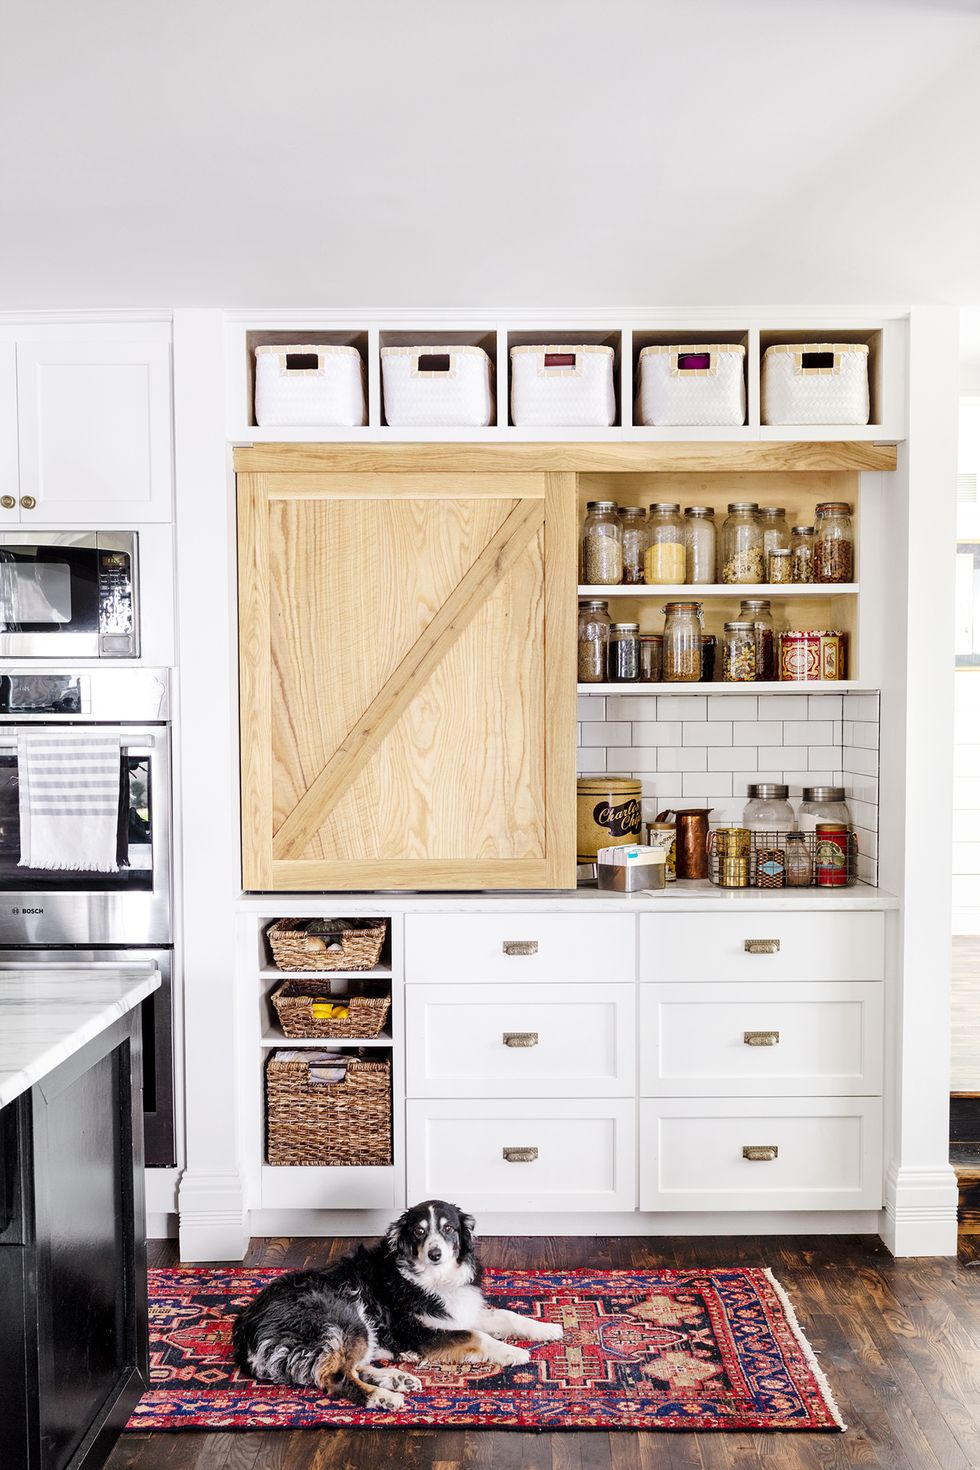 pantry organization ideas, sliding barn door revealing shelves with jars of spices and food in the kitchen